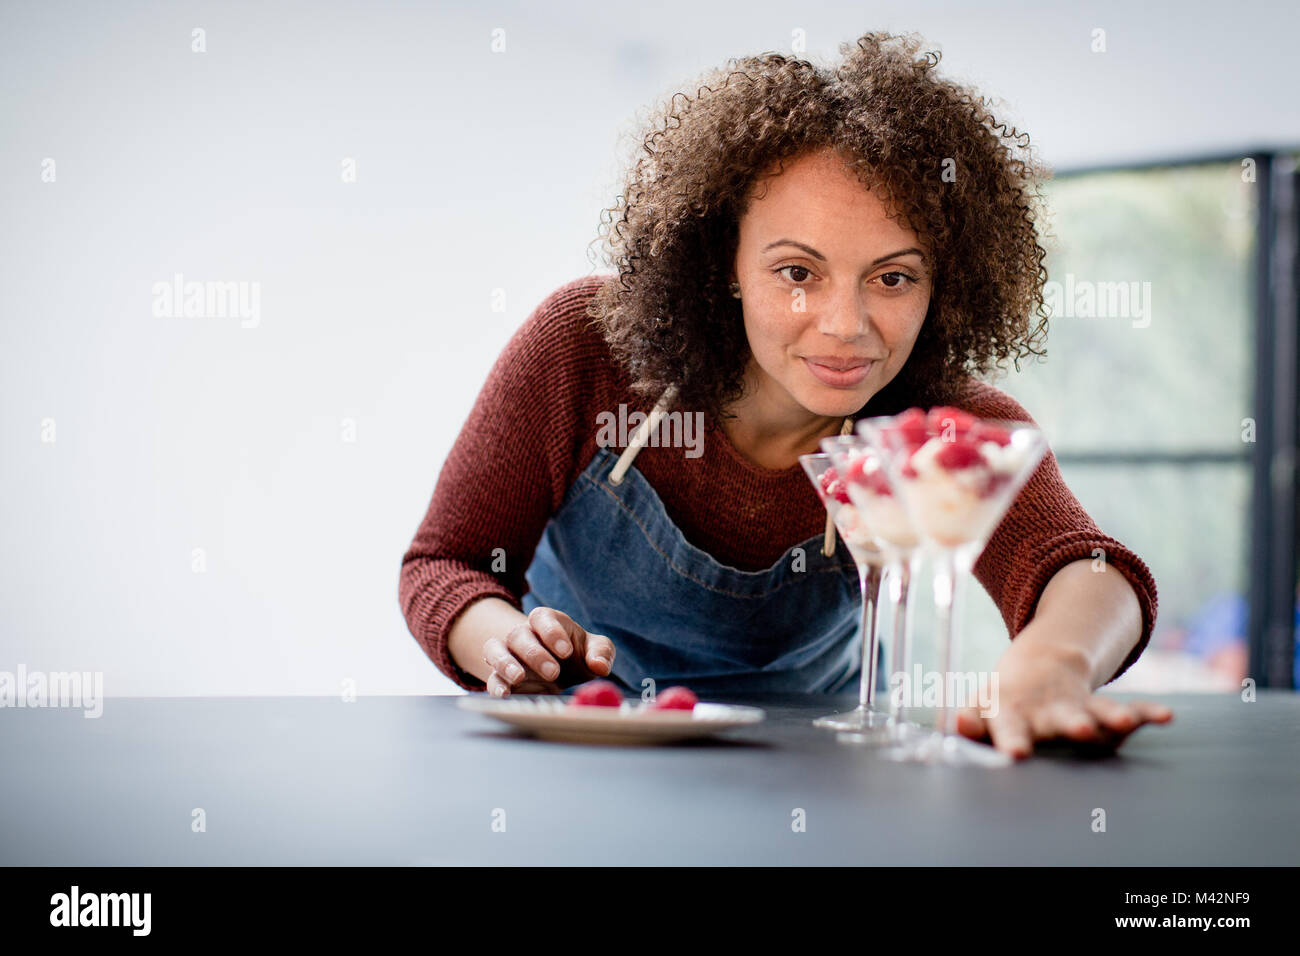 Female cook putting final touches to desert Stock Photo